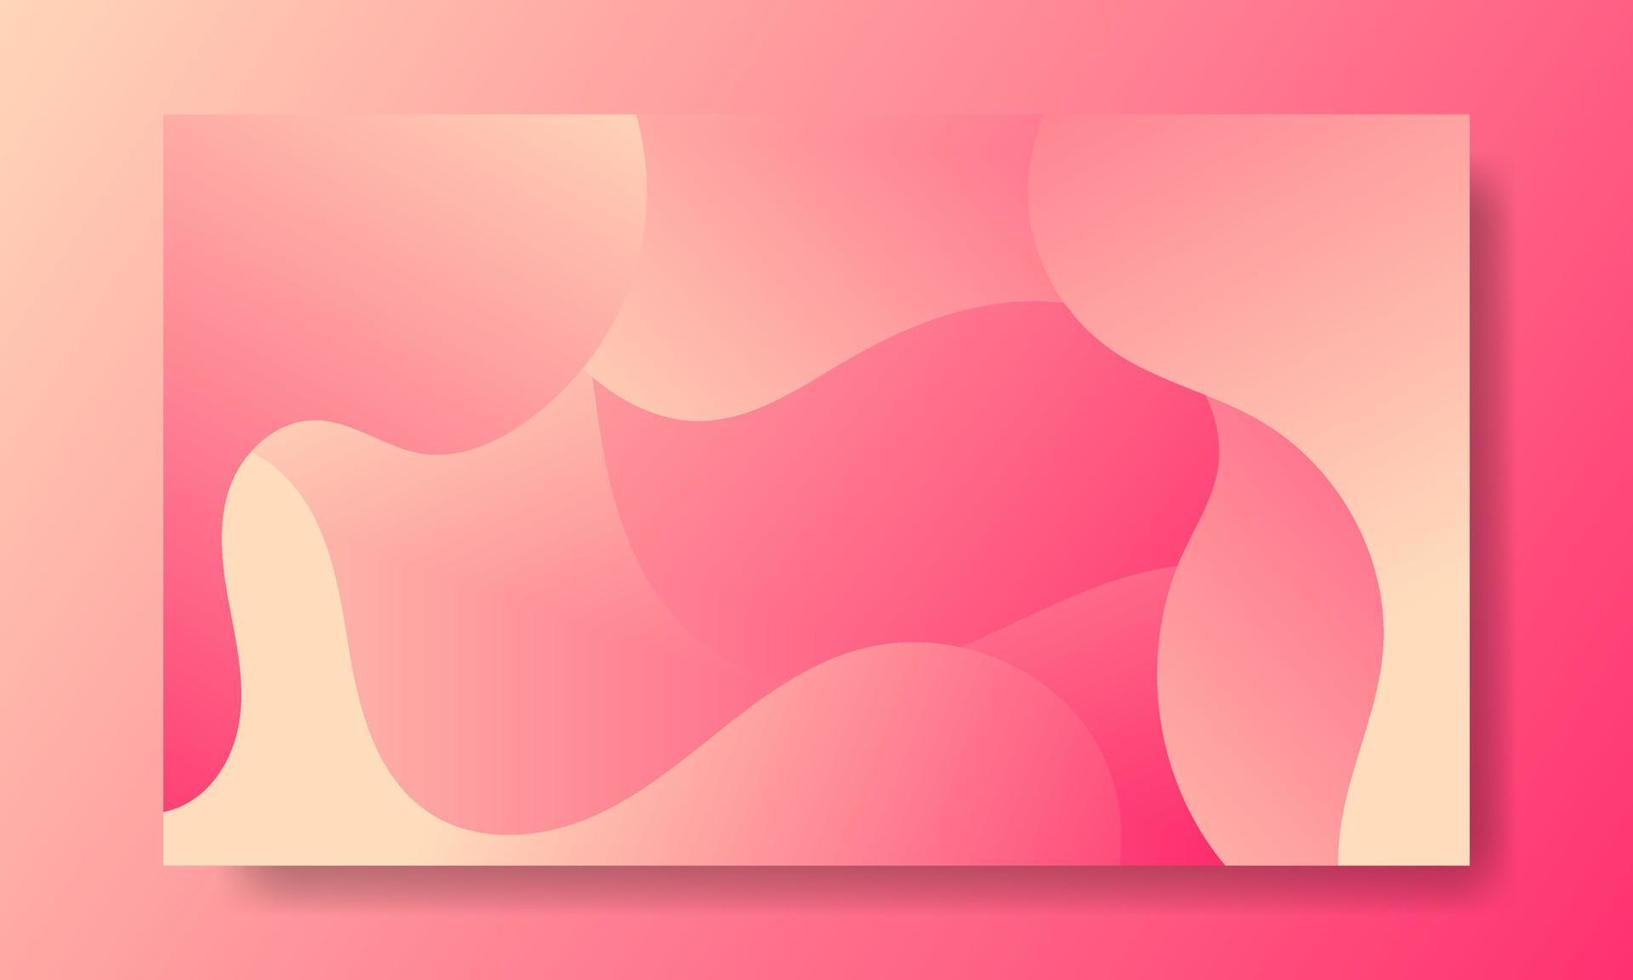 Abstract Pink Fluid Wave Background vector